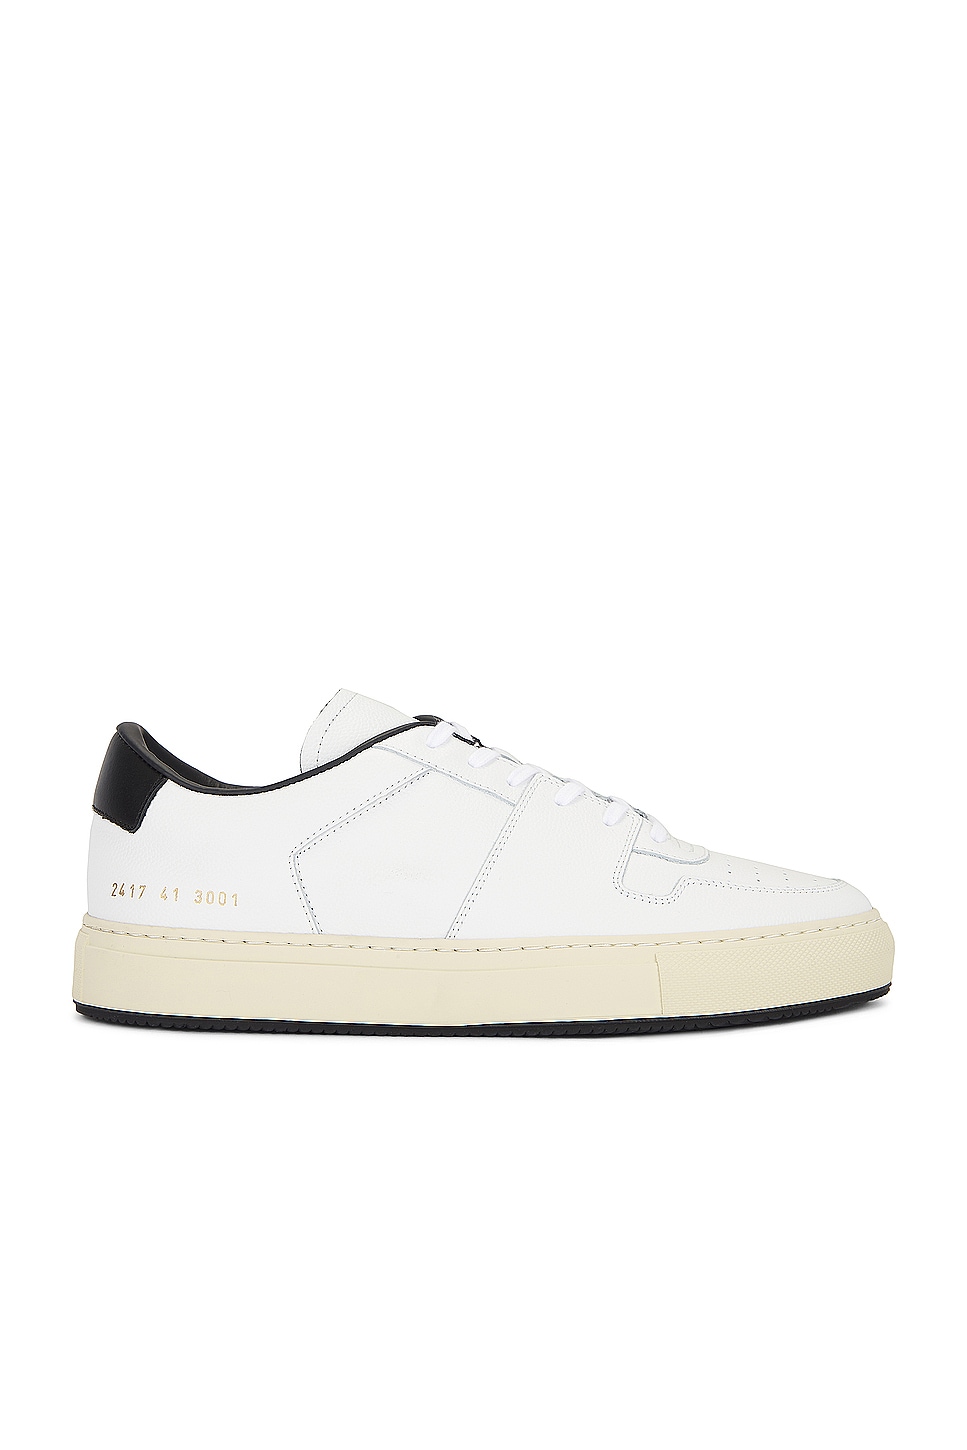 Image 1 of Common Projects Decades Sneaker in Warm White